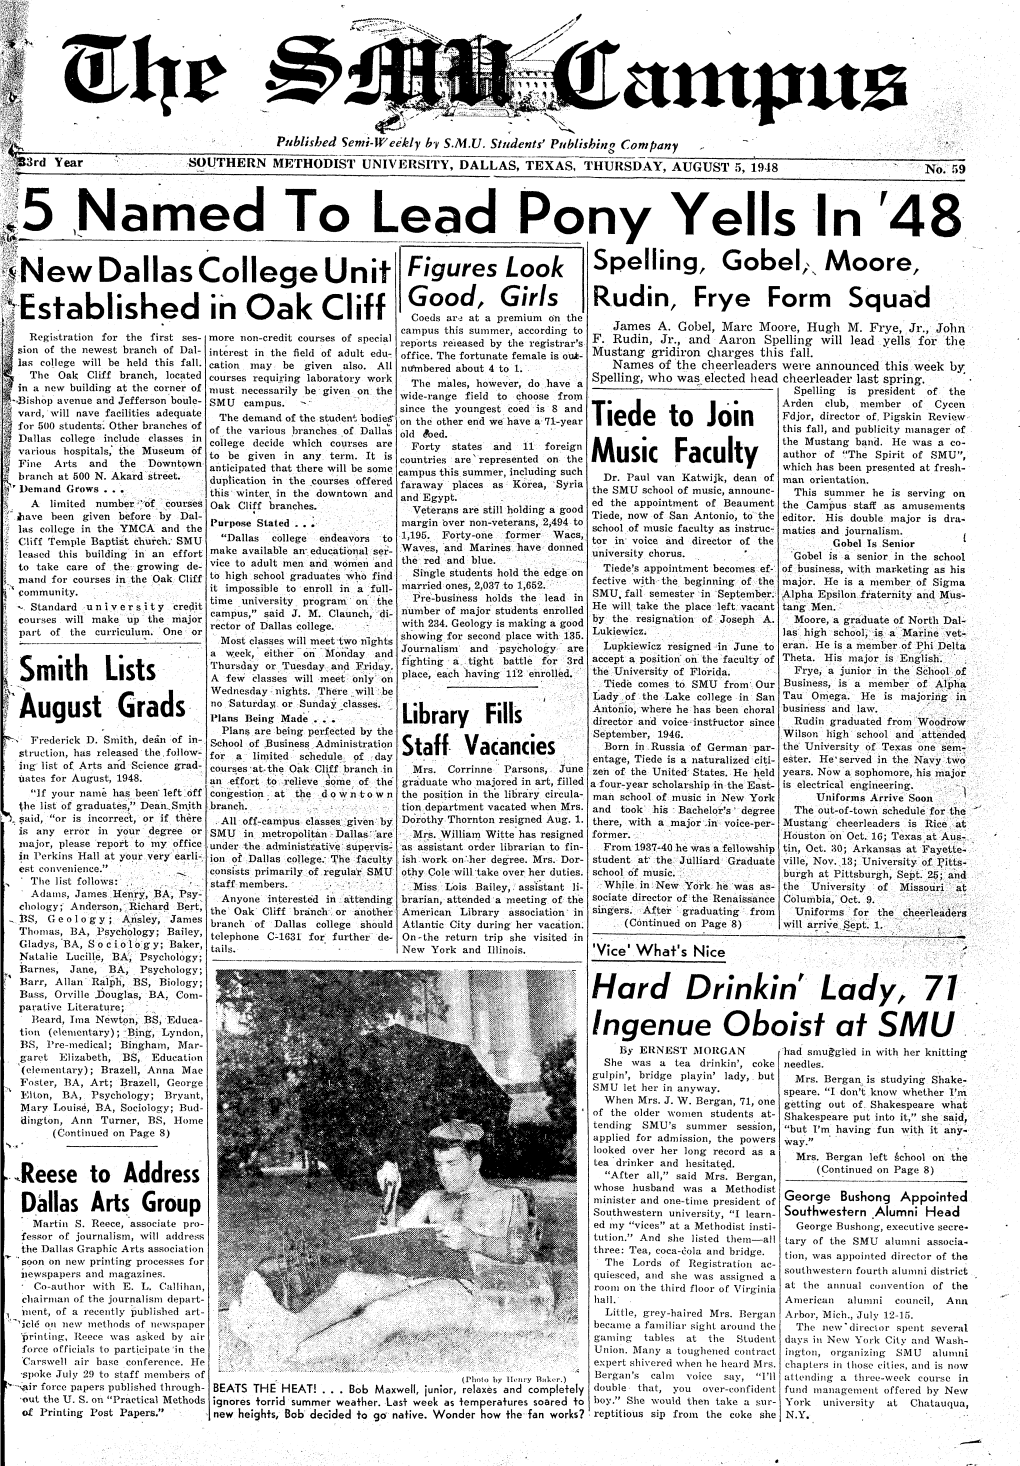 The SMU Campus, Volume 33, Number 59, August 5, 1948